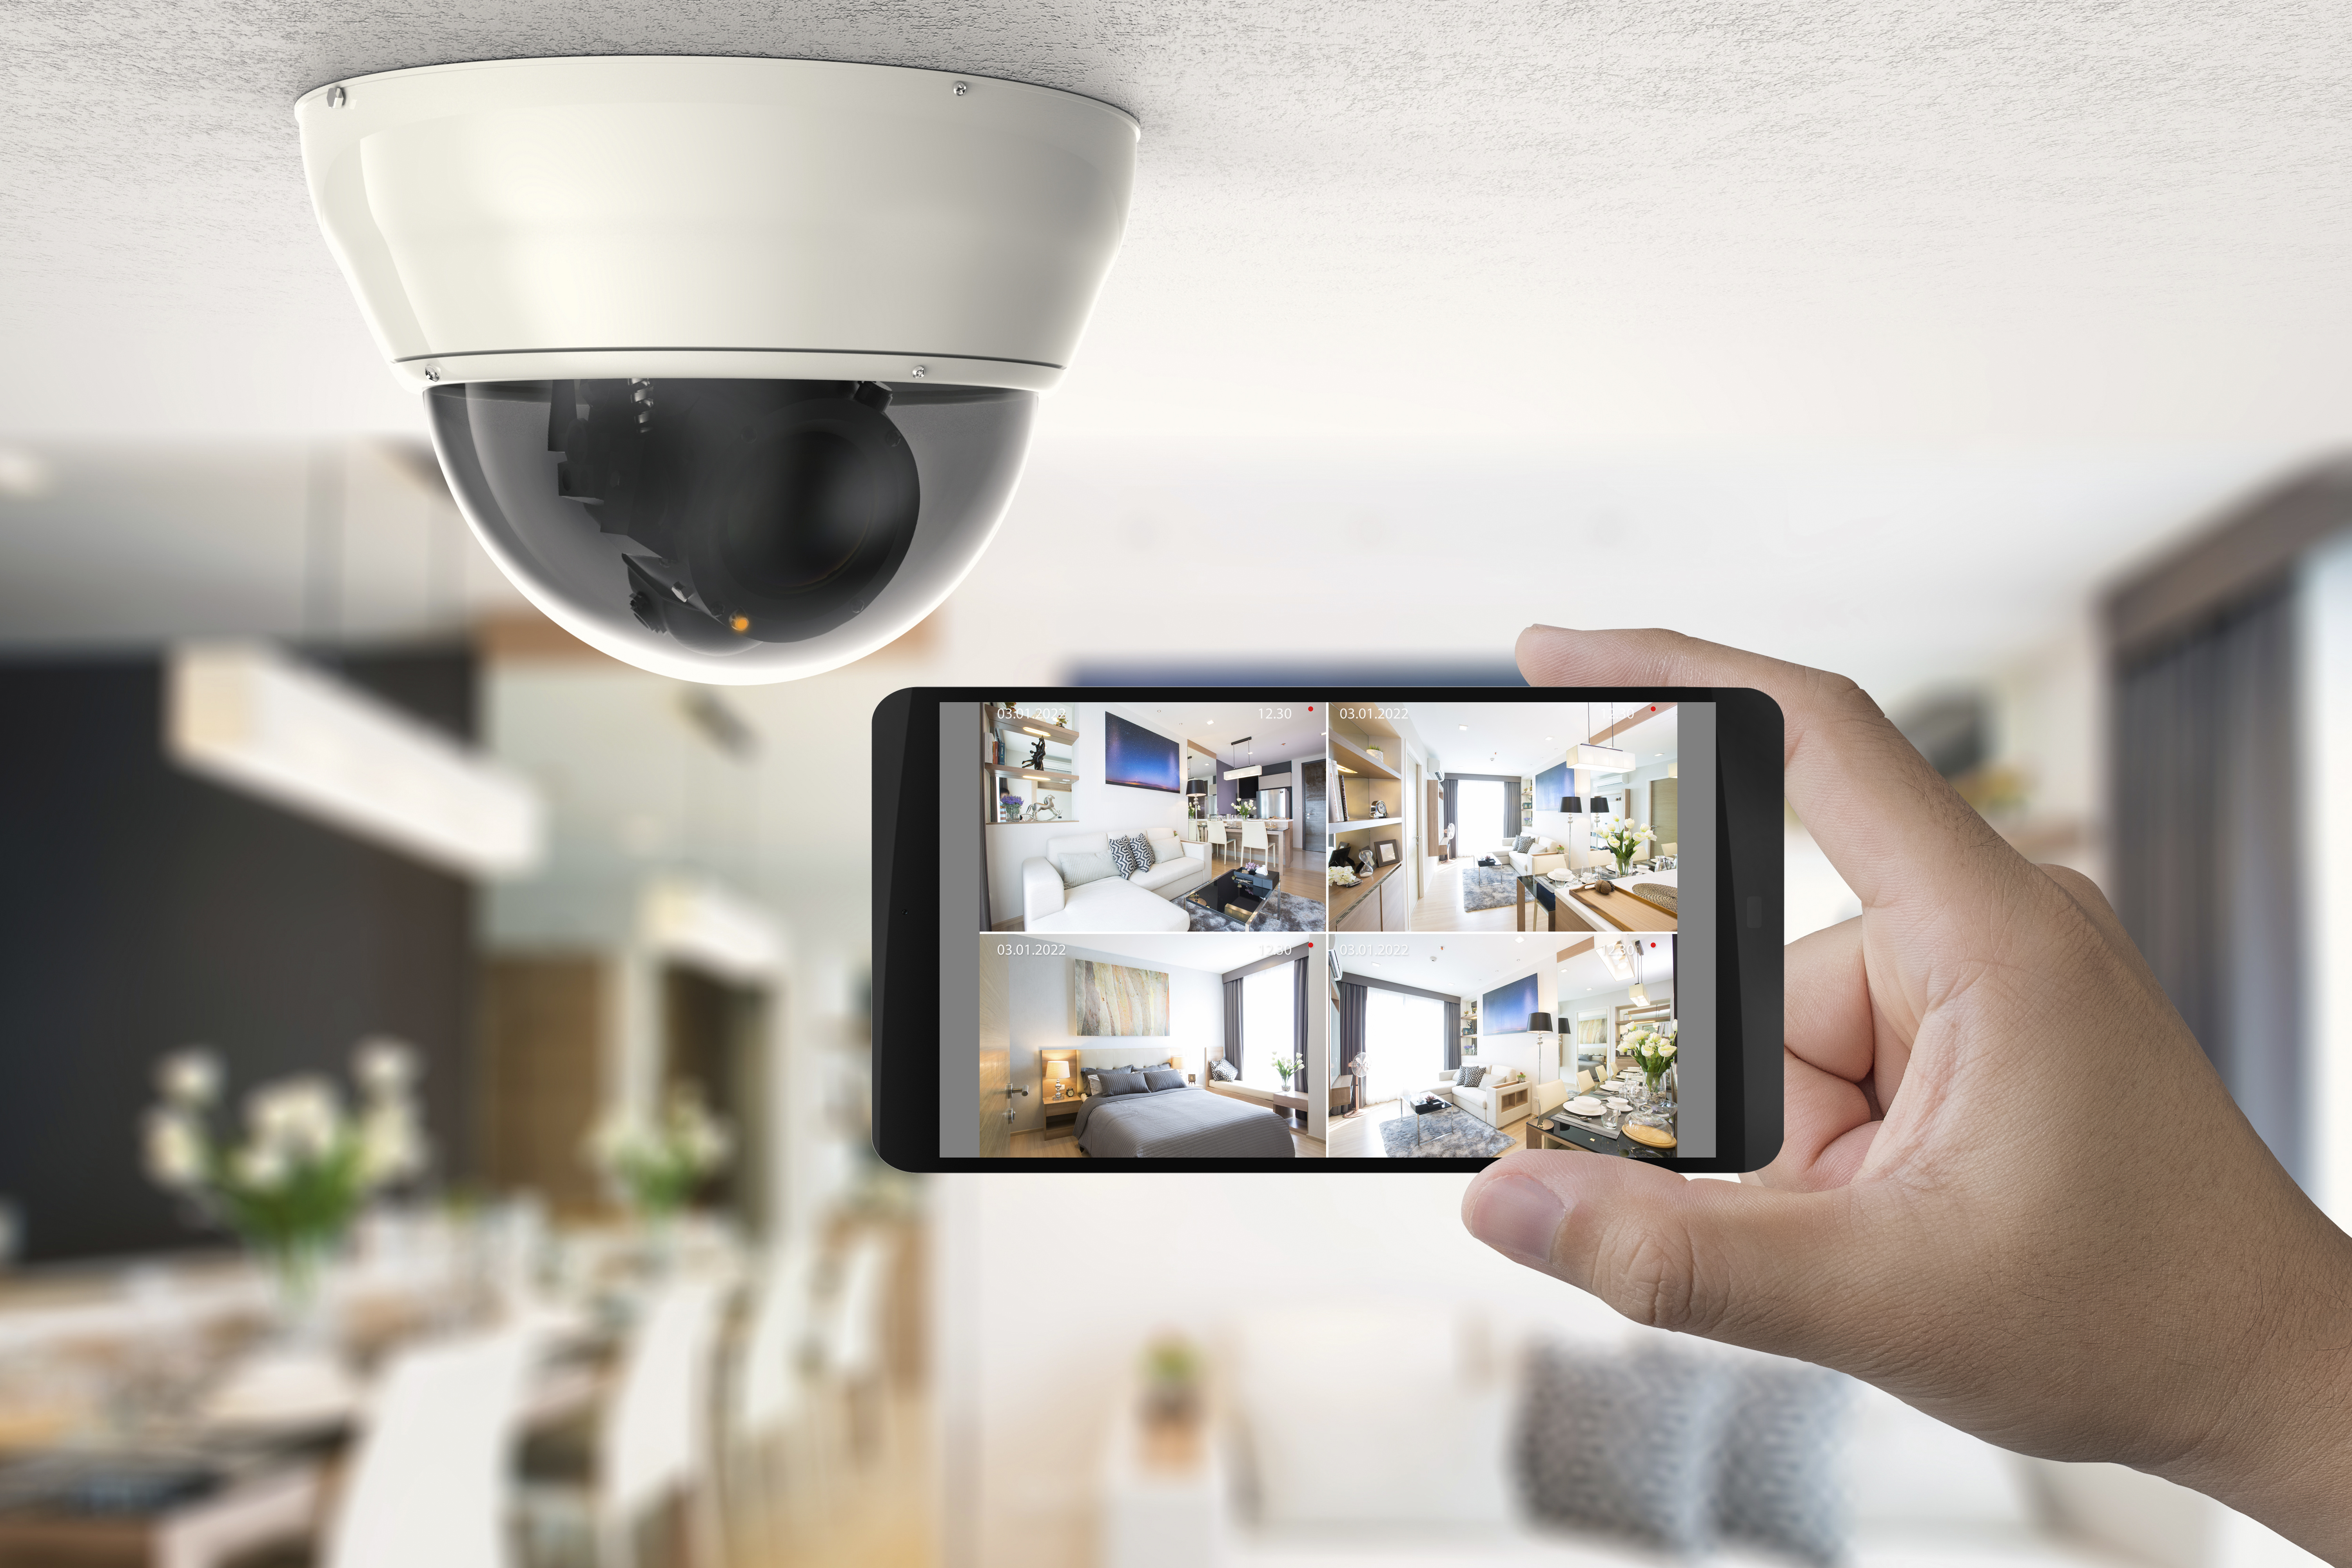 Security Cameras that tracks motion by Eufy